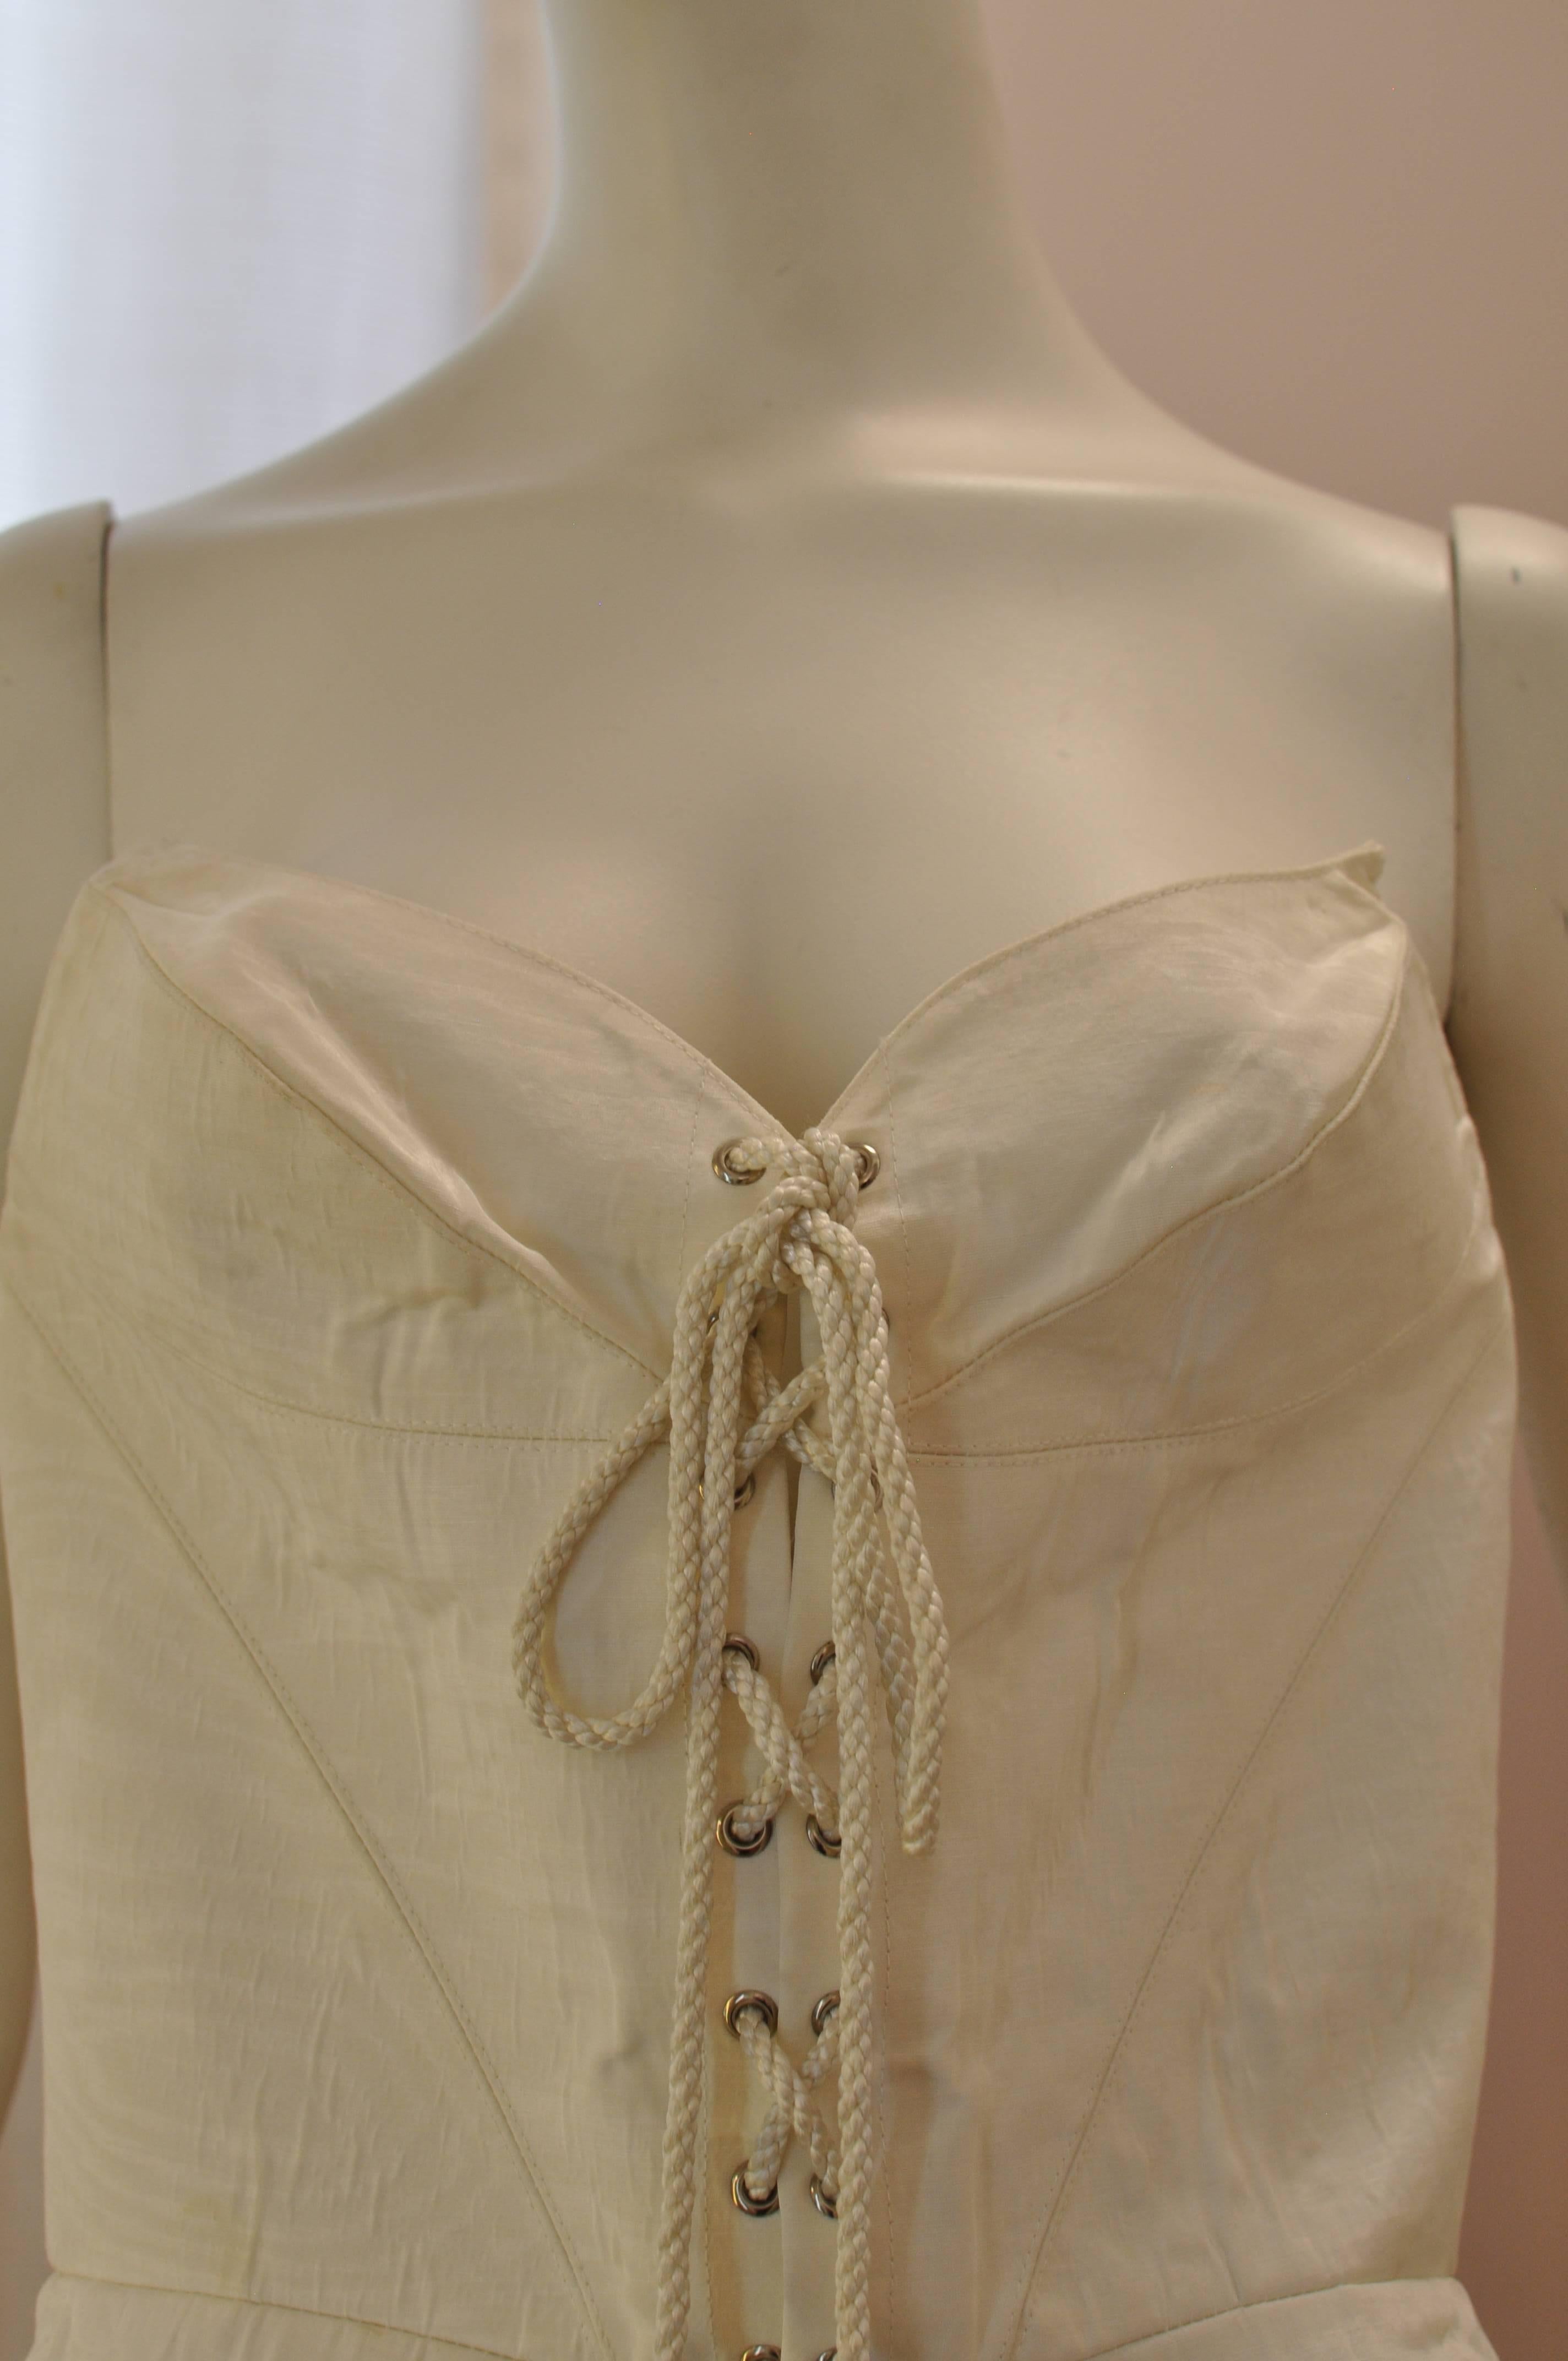 Typical of Mugler's designs; pointed edges; interesting darts and pronounced angles. This cream colored/ecru bustier is  laced up in the front with metal pointed anchors, but also has a back center zipper. It is in far condition as the